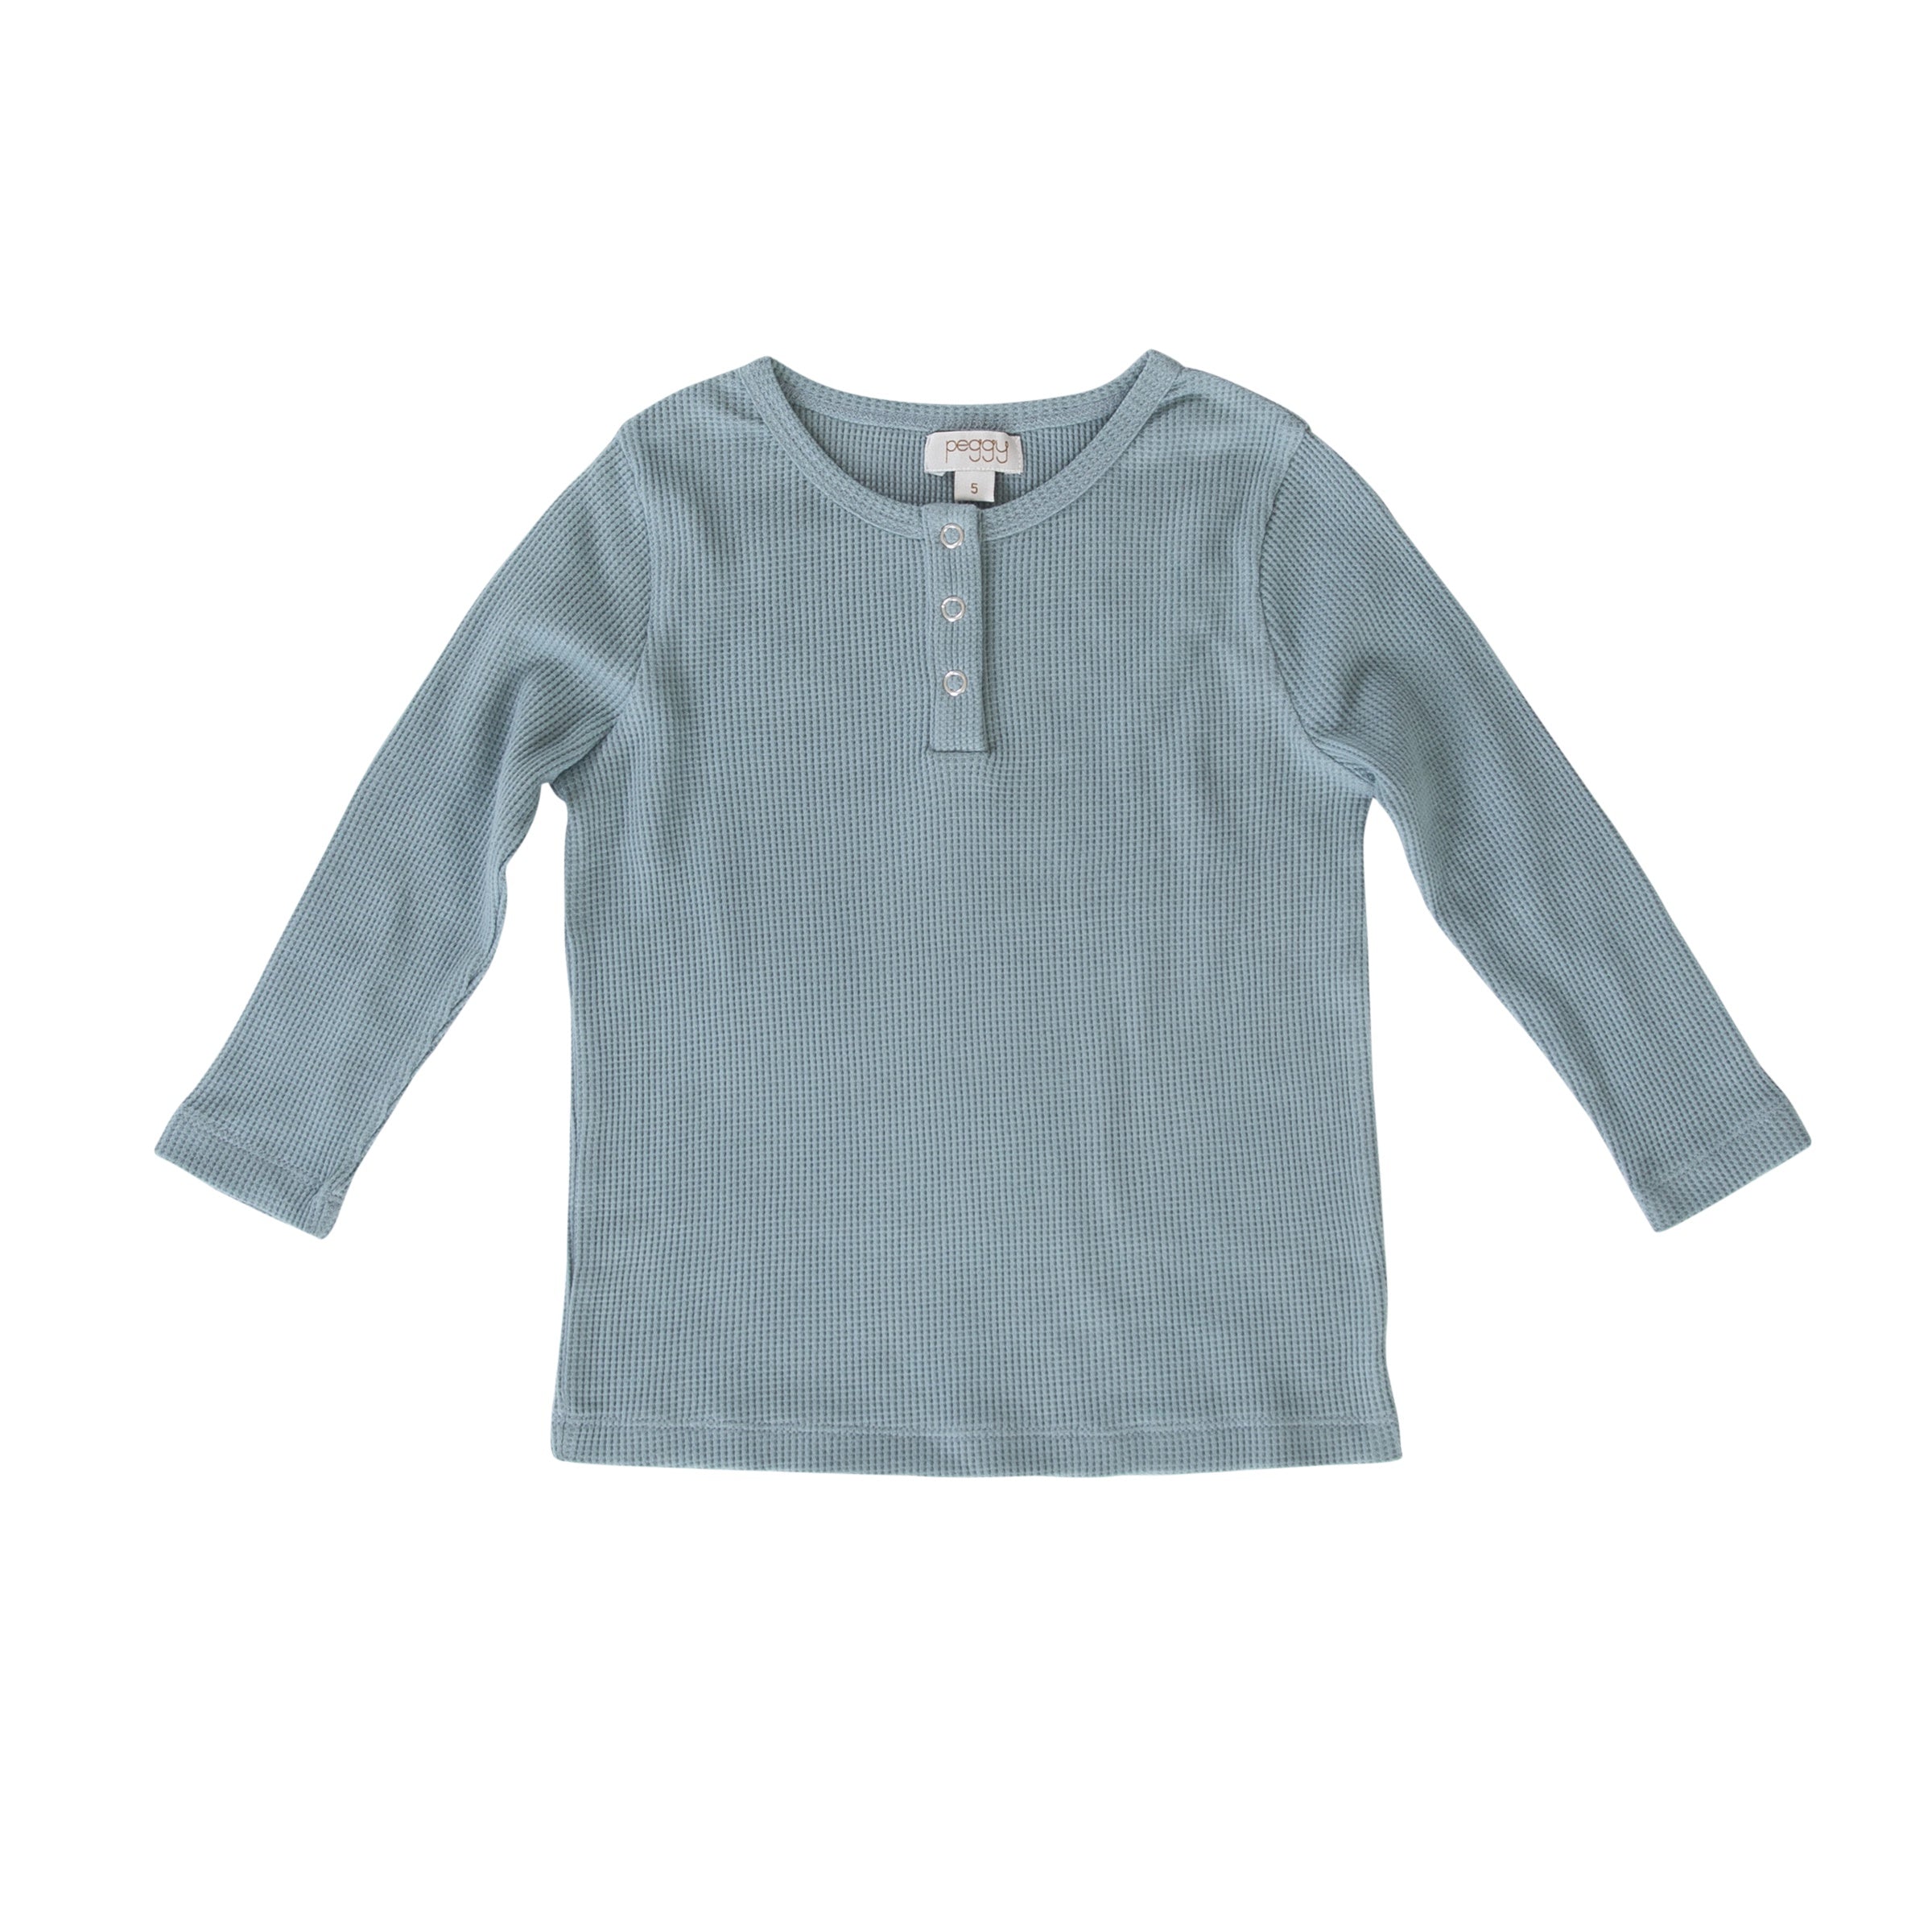 Peggy - Halo Henley Top - Blue Surf